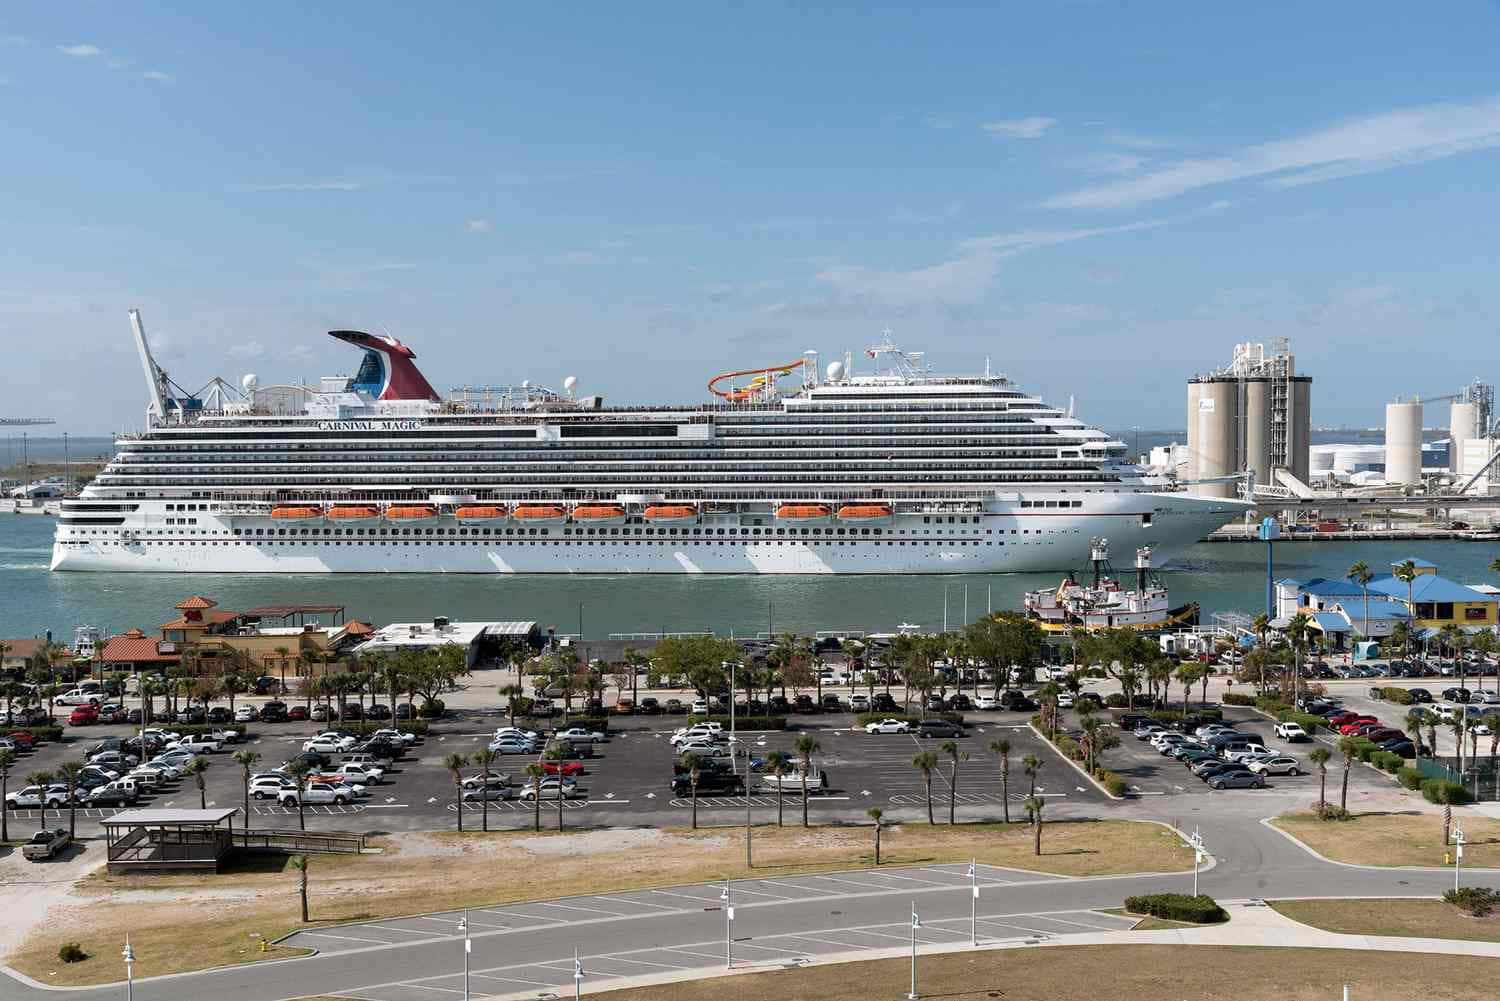 Enjoy the thrilling rides and attractions aboard the Carnival Magic!